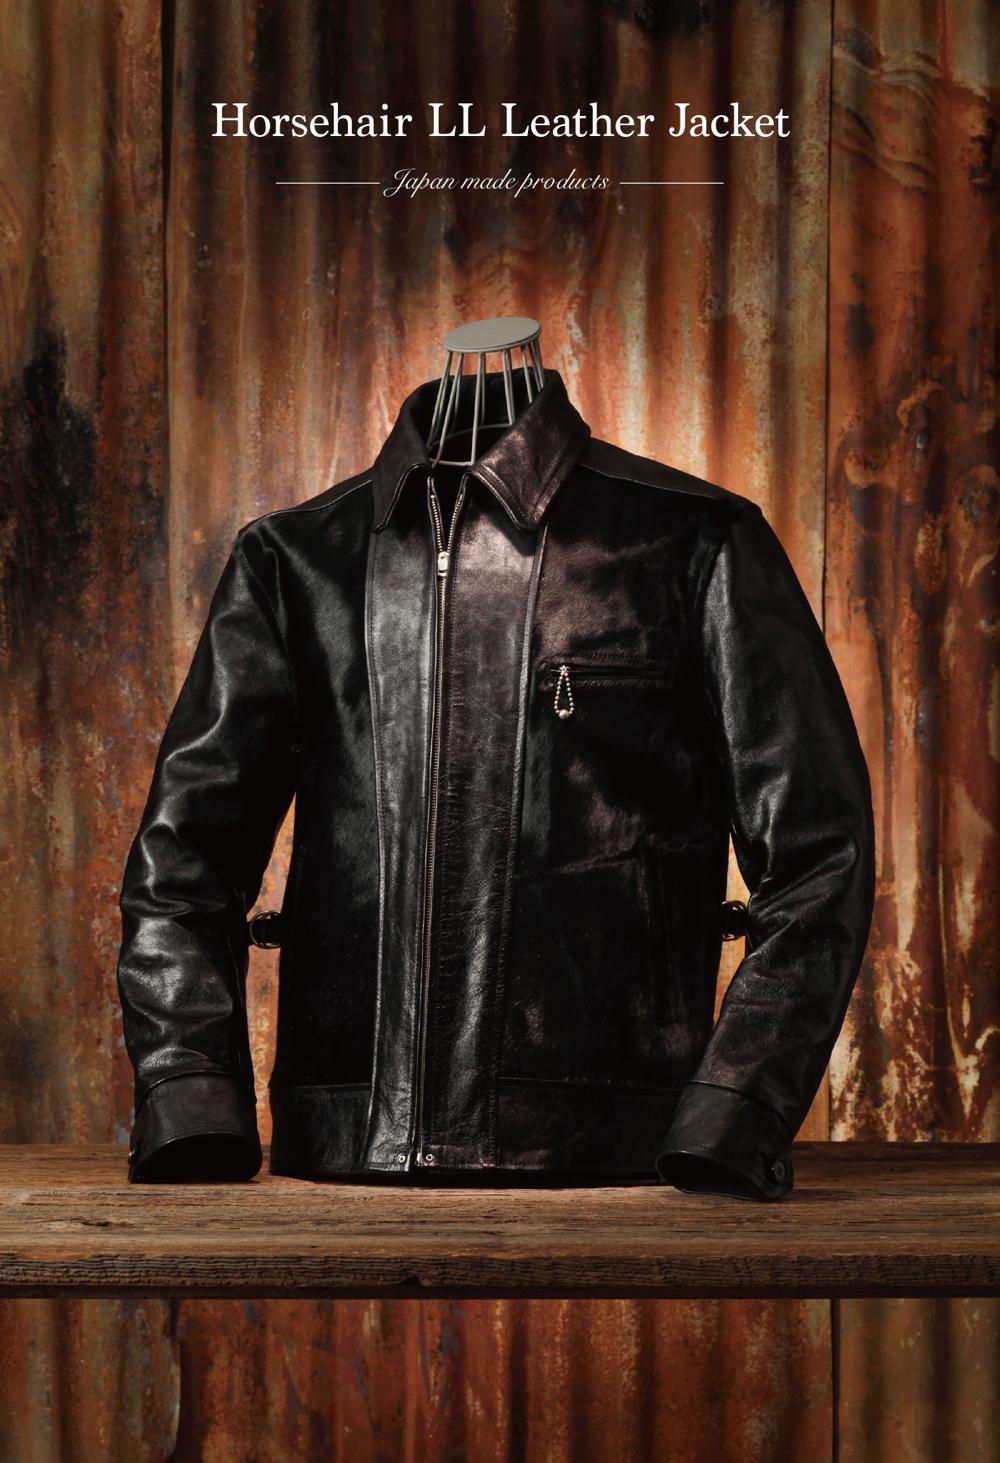 【Attractions】 Horsehair LL Leather Jacket_c0289919_12294130.jpg